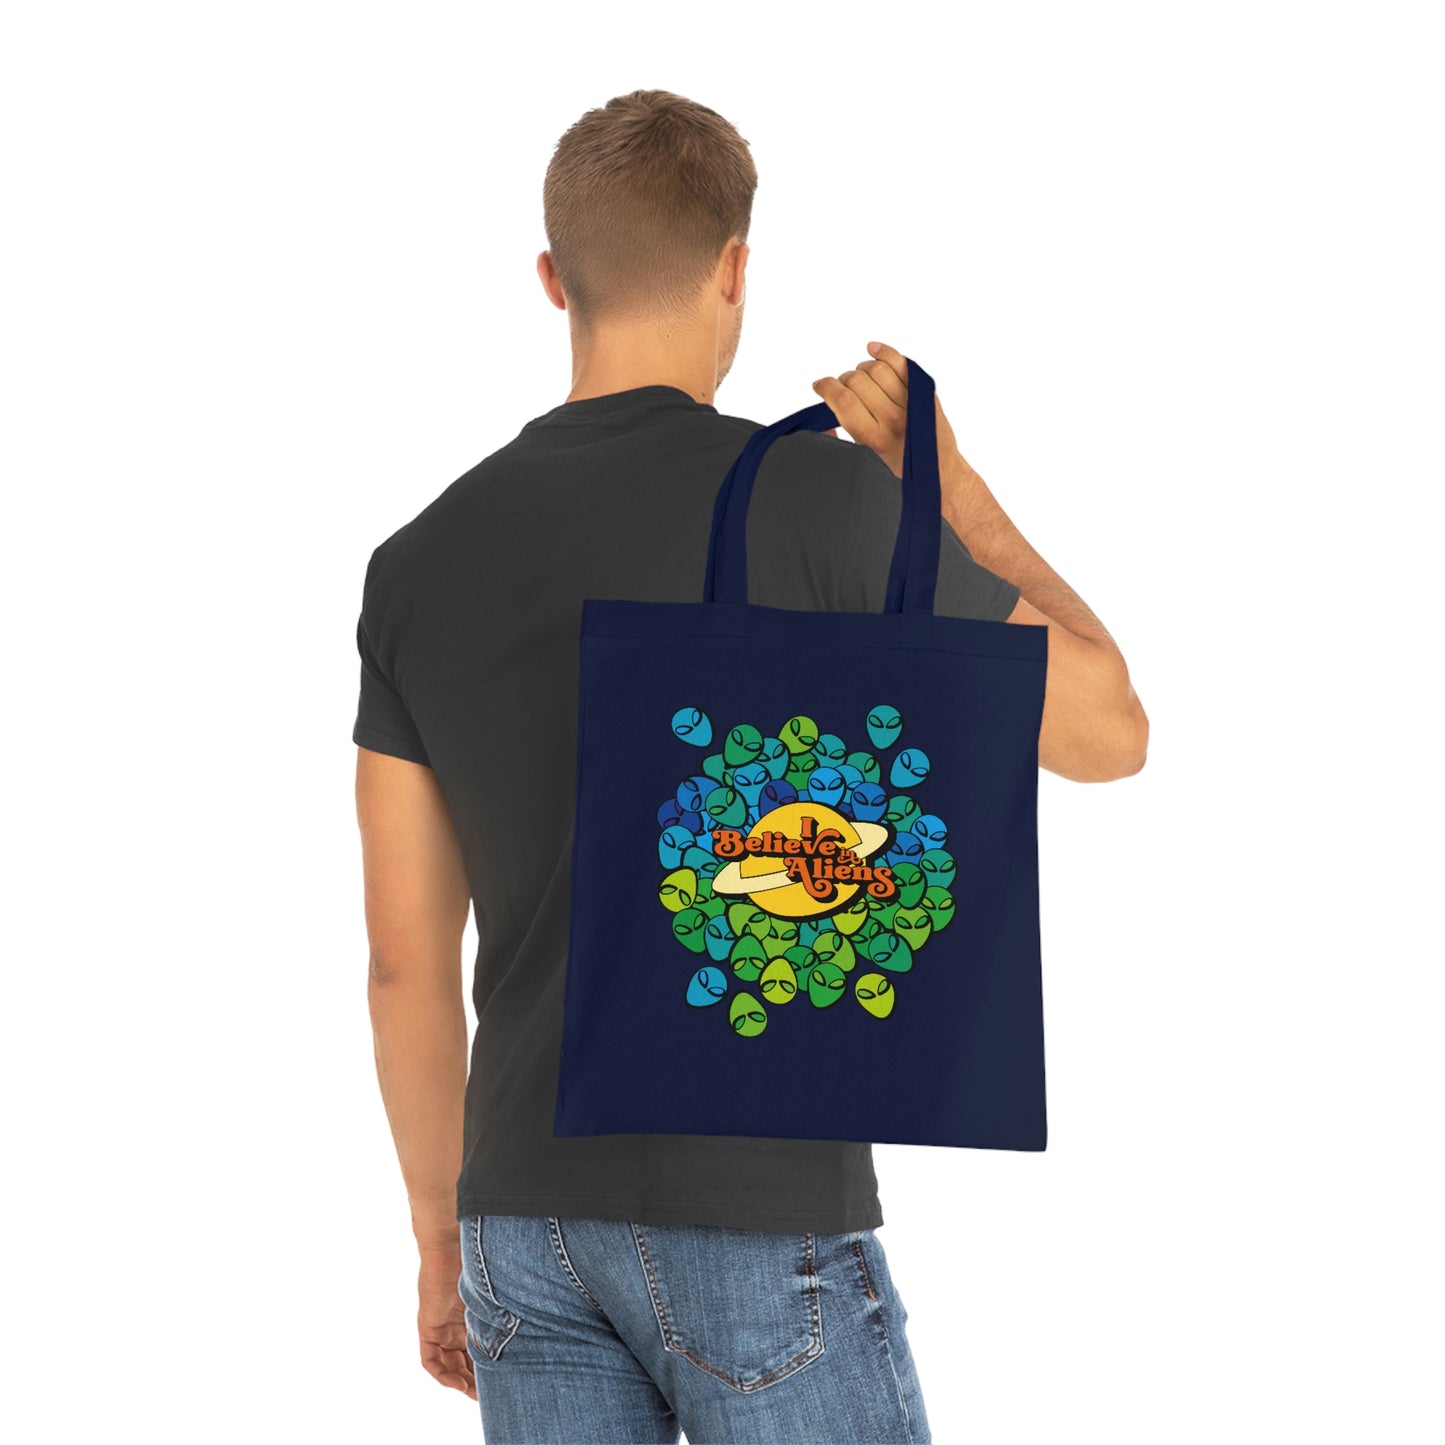 Weirdo | Durable shopping with this awesome cotton tote bag! This navy blue cotton tote bag has our Alien meme printed at the front of the bag. Do you believe in Aliens?